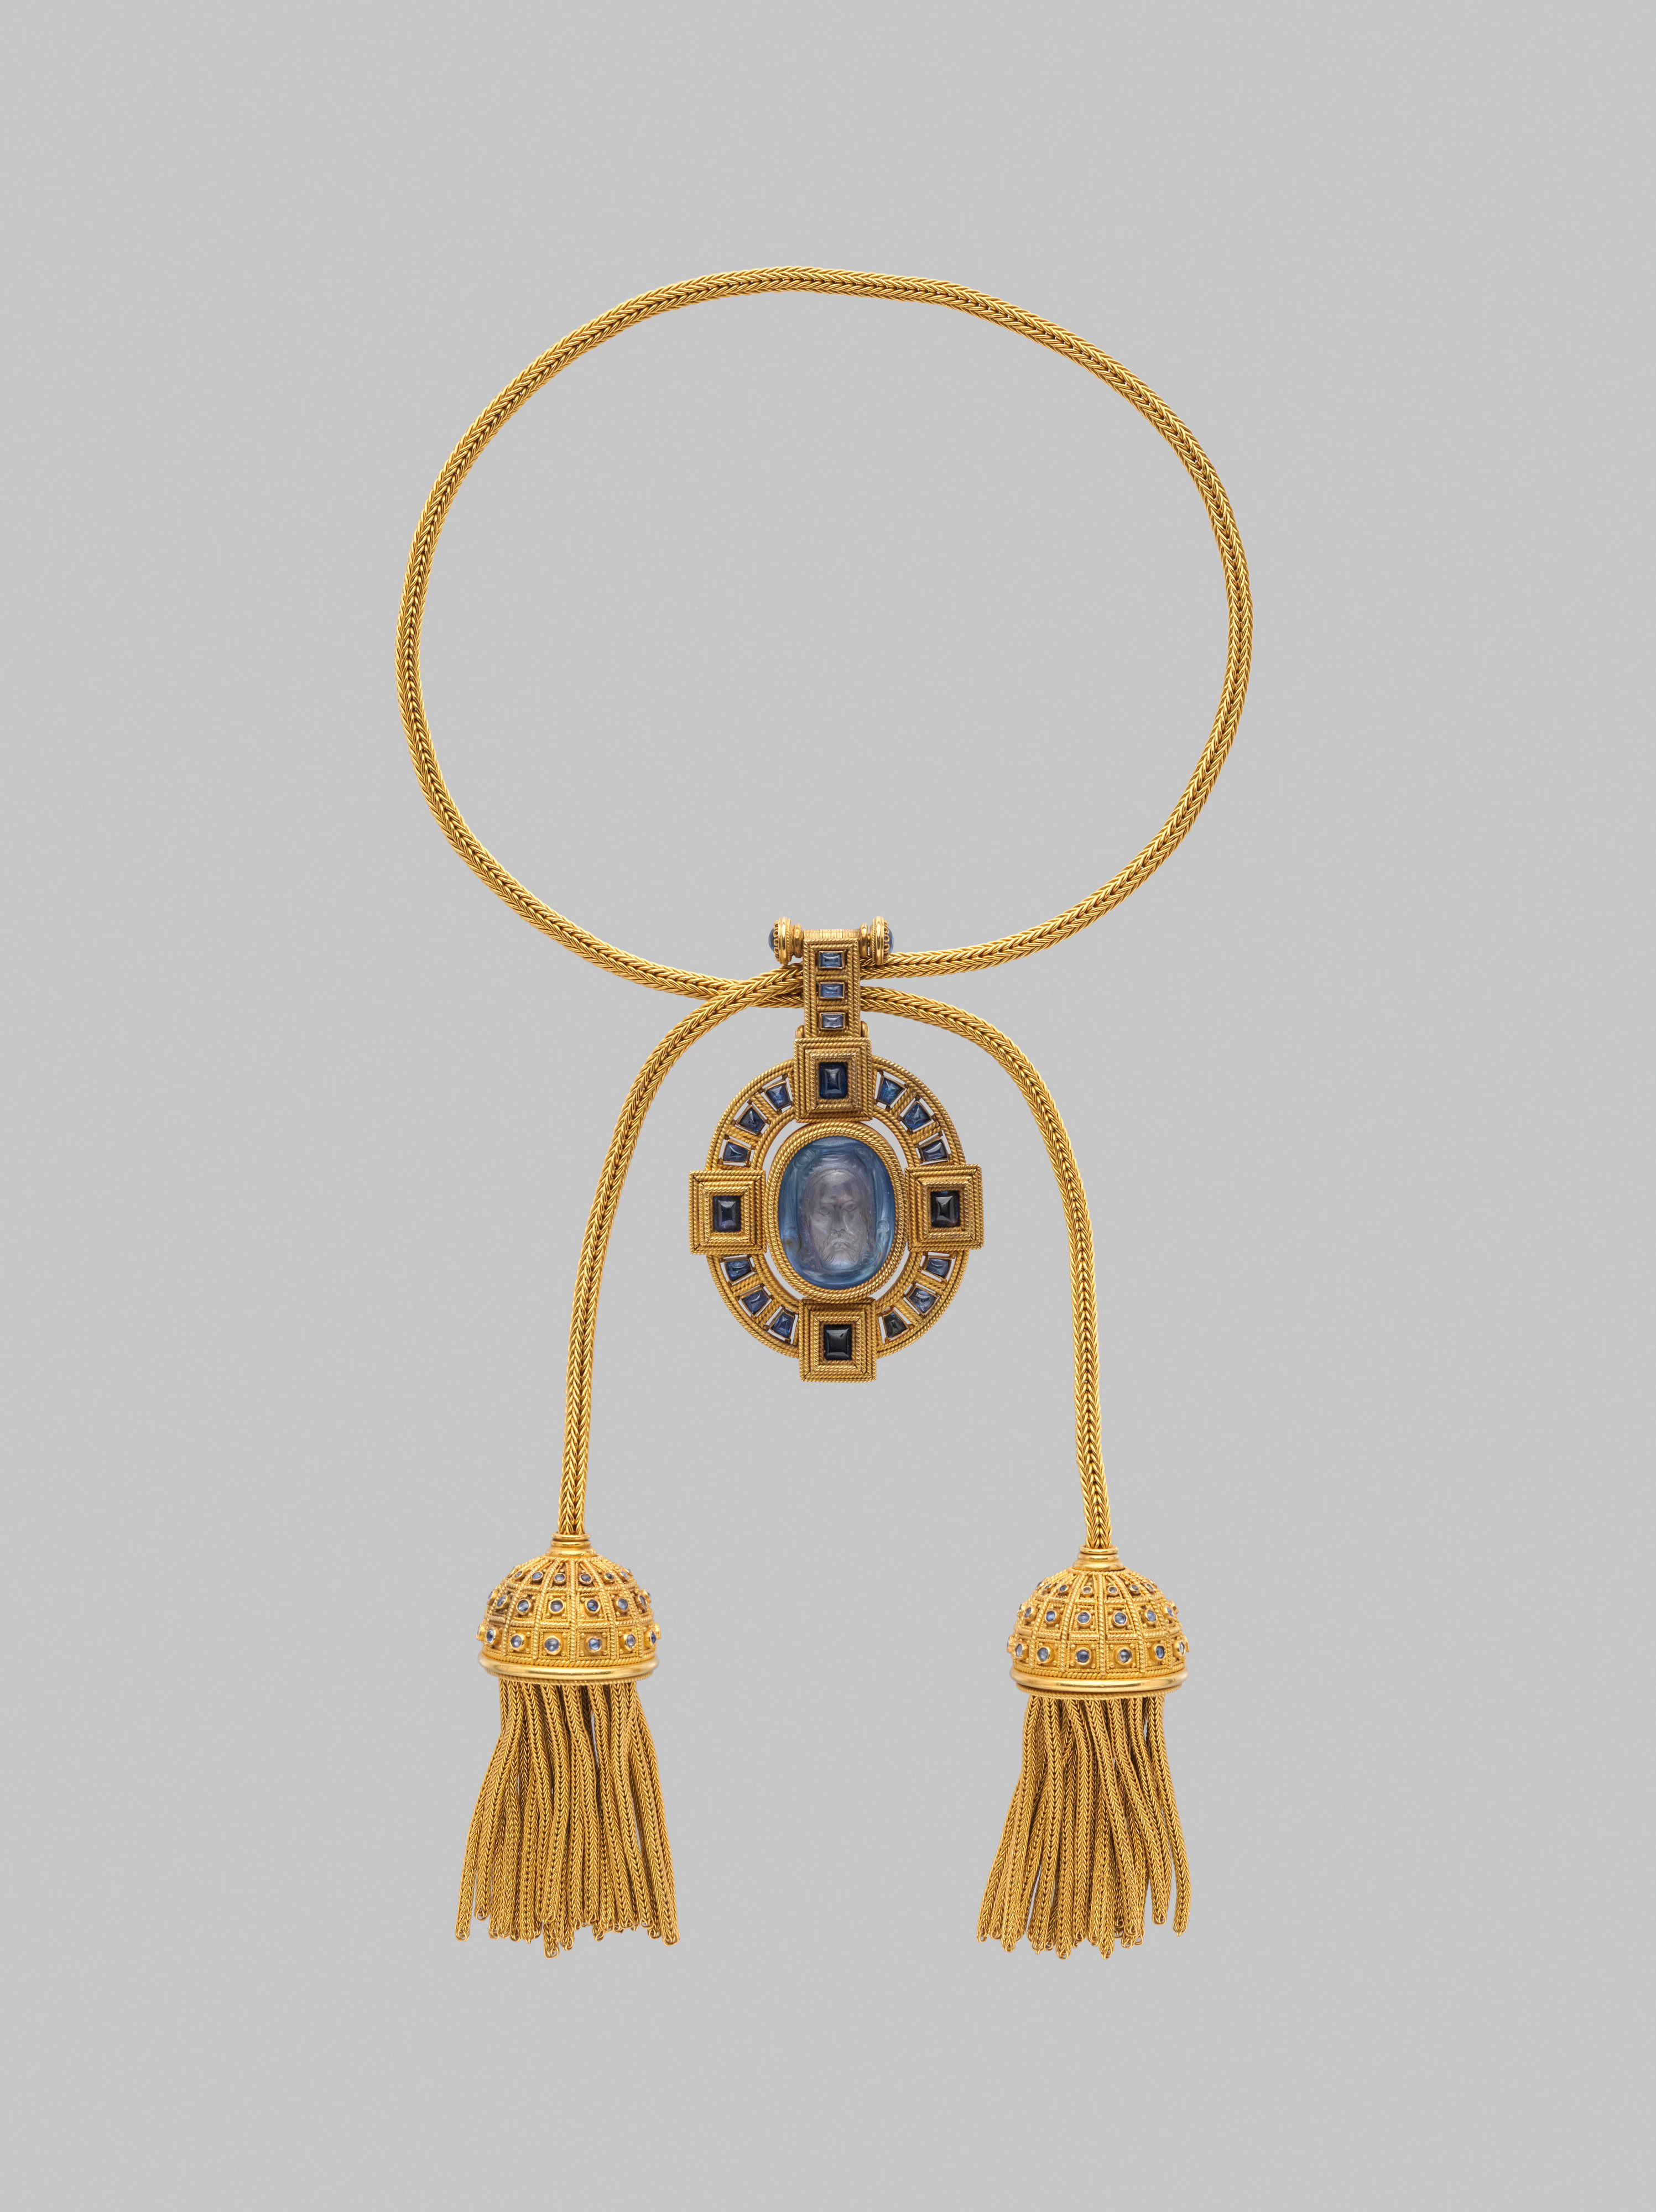 Necklace with cameo of Veronica’s Vail, c. 1870 by Castellani in the collection of the Metropolitan Museum of Art. 